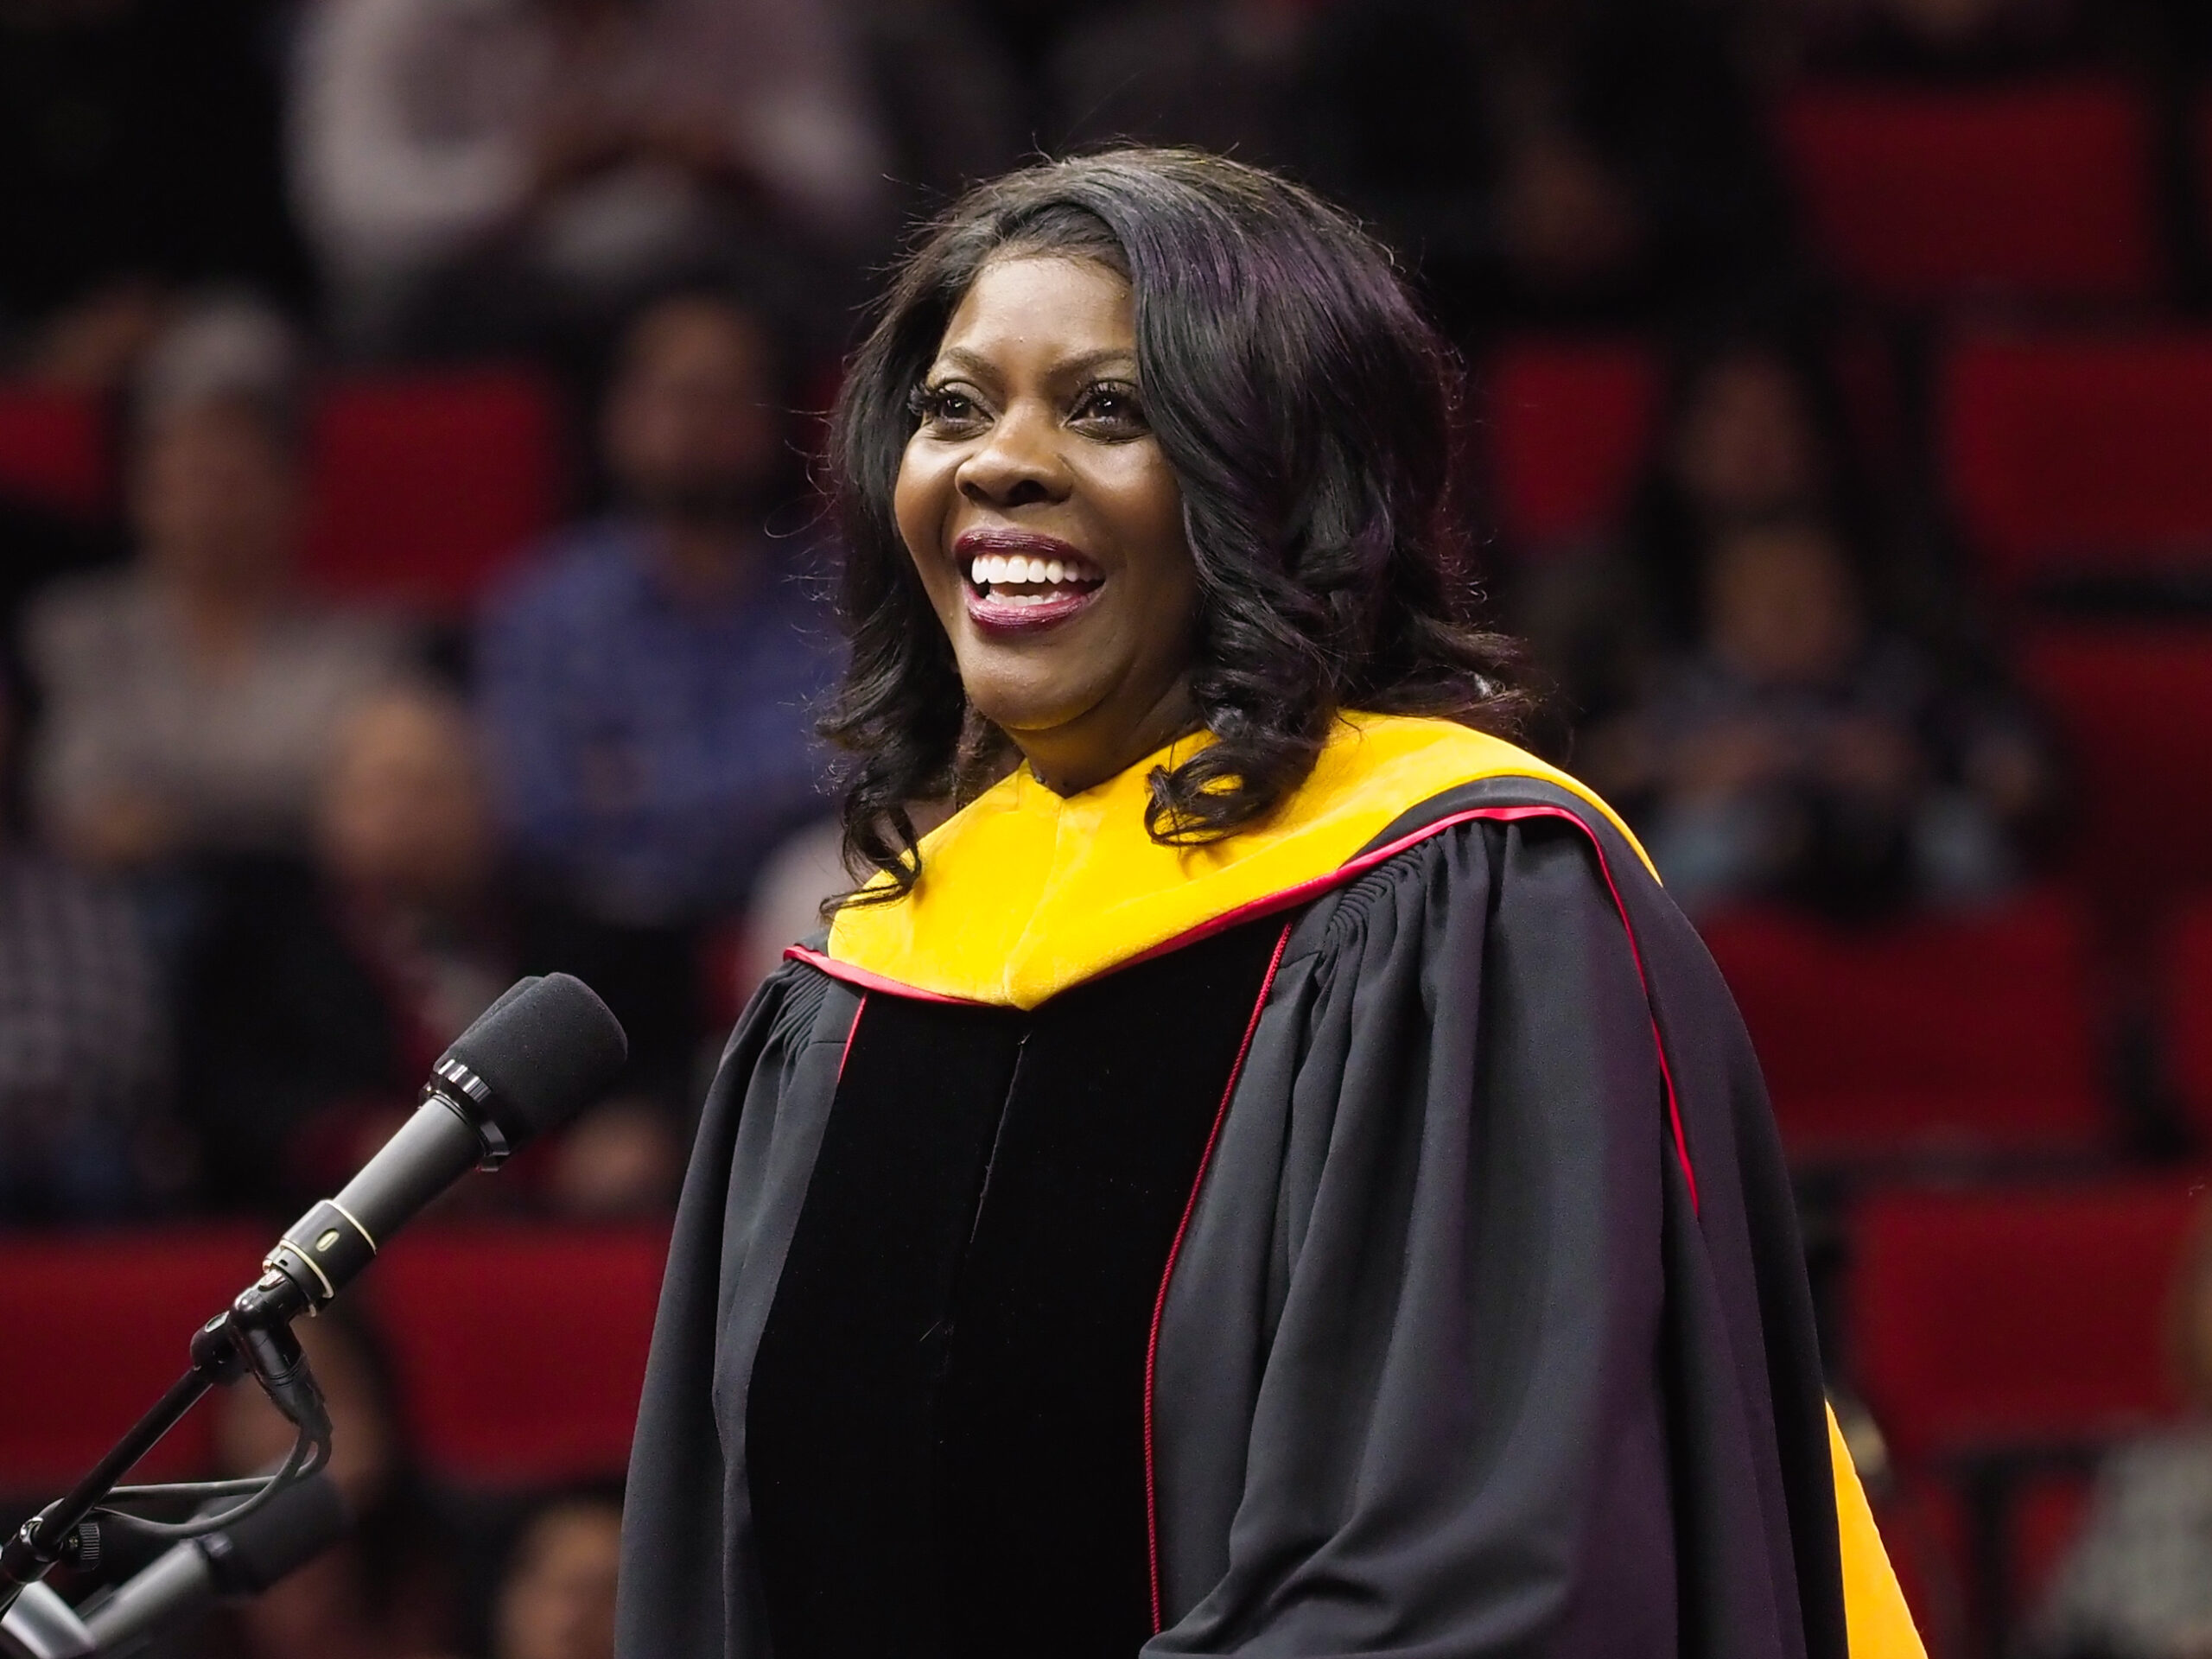 Fall 2022 Commencement Speaker Chavonda Jacobs-Young addressed graduates.